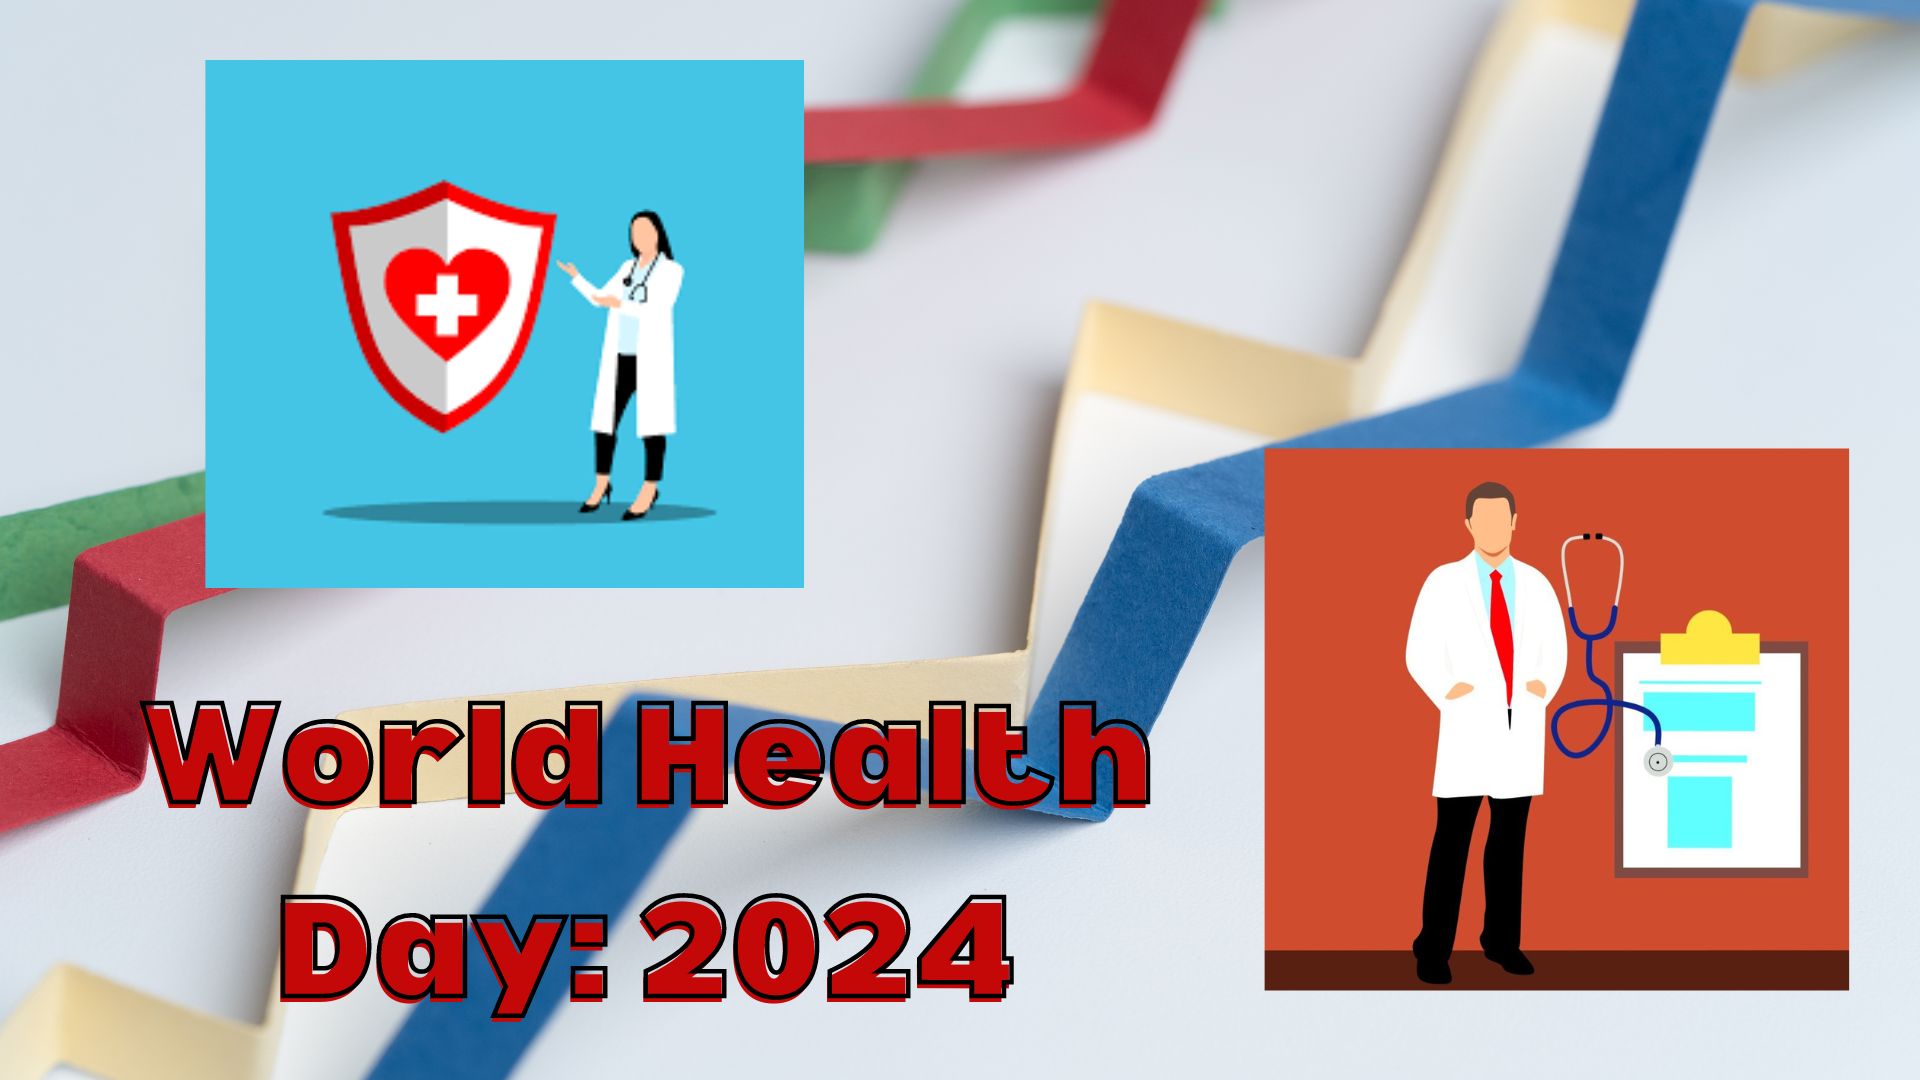 World Health Day 2024: ‘My Health, My Rights’ Initiative launched